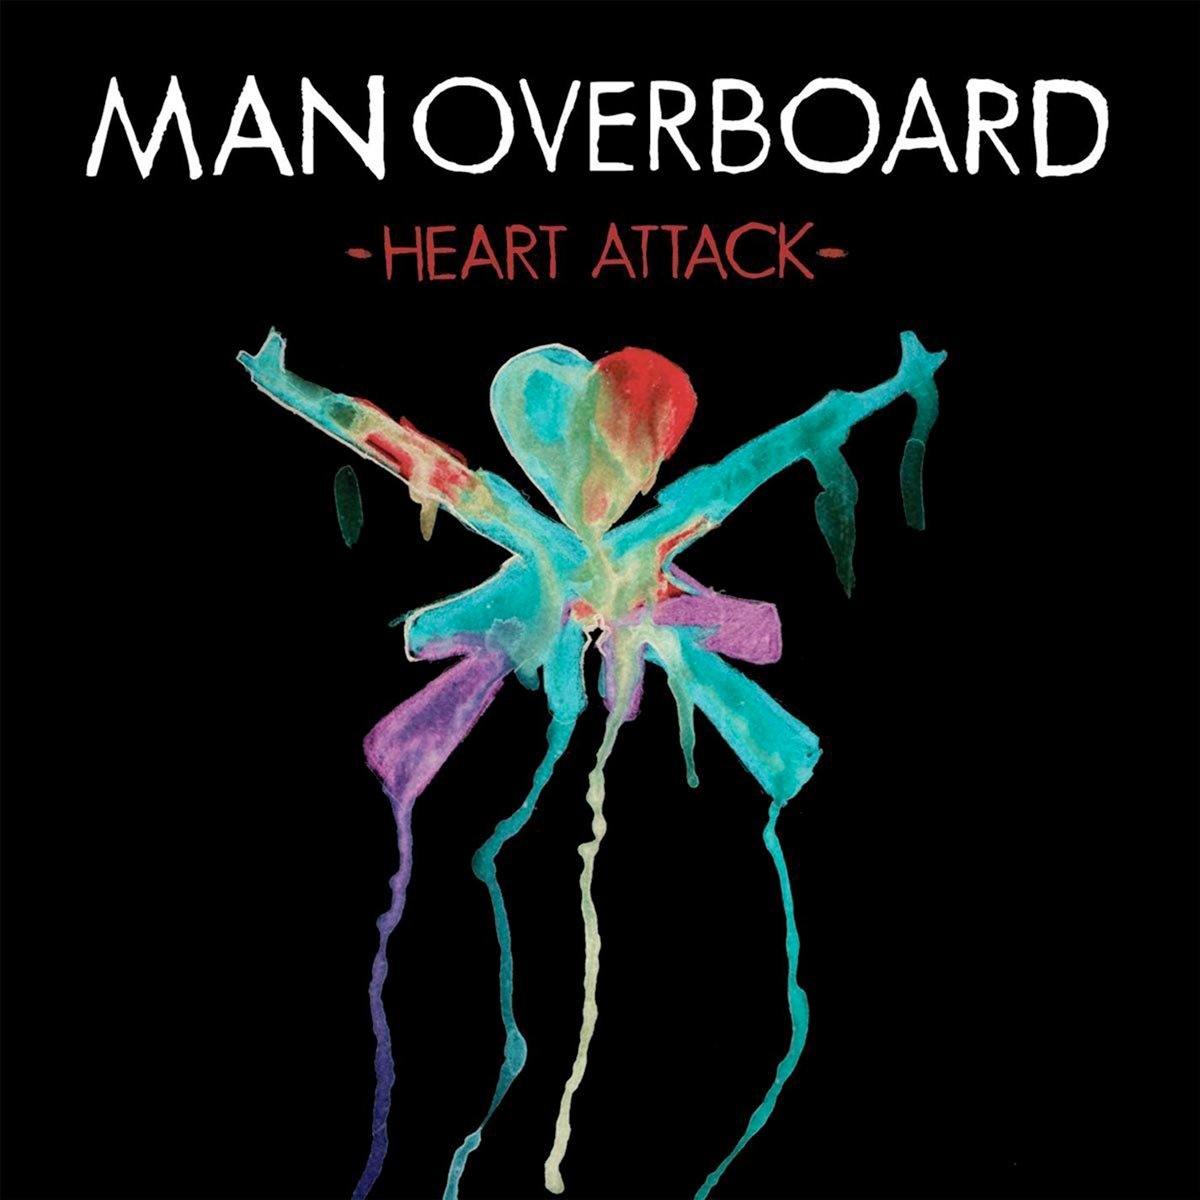 Buy – Man Overboard "Heart Attack" CD – Band & Music Merch – Cold Cuts Merch